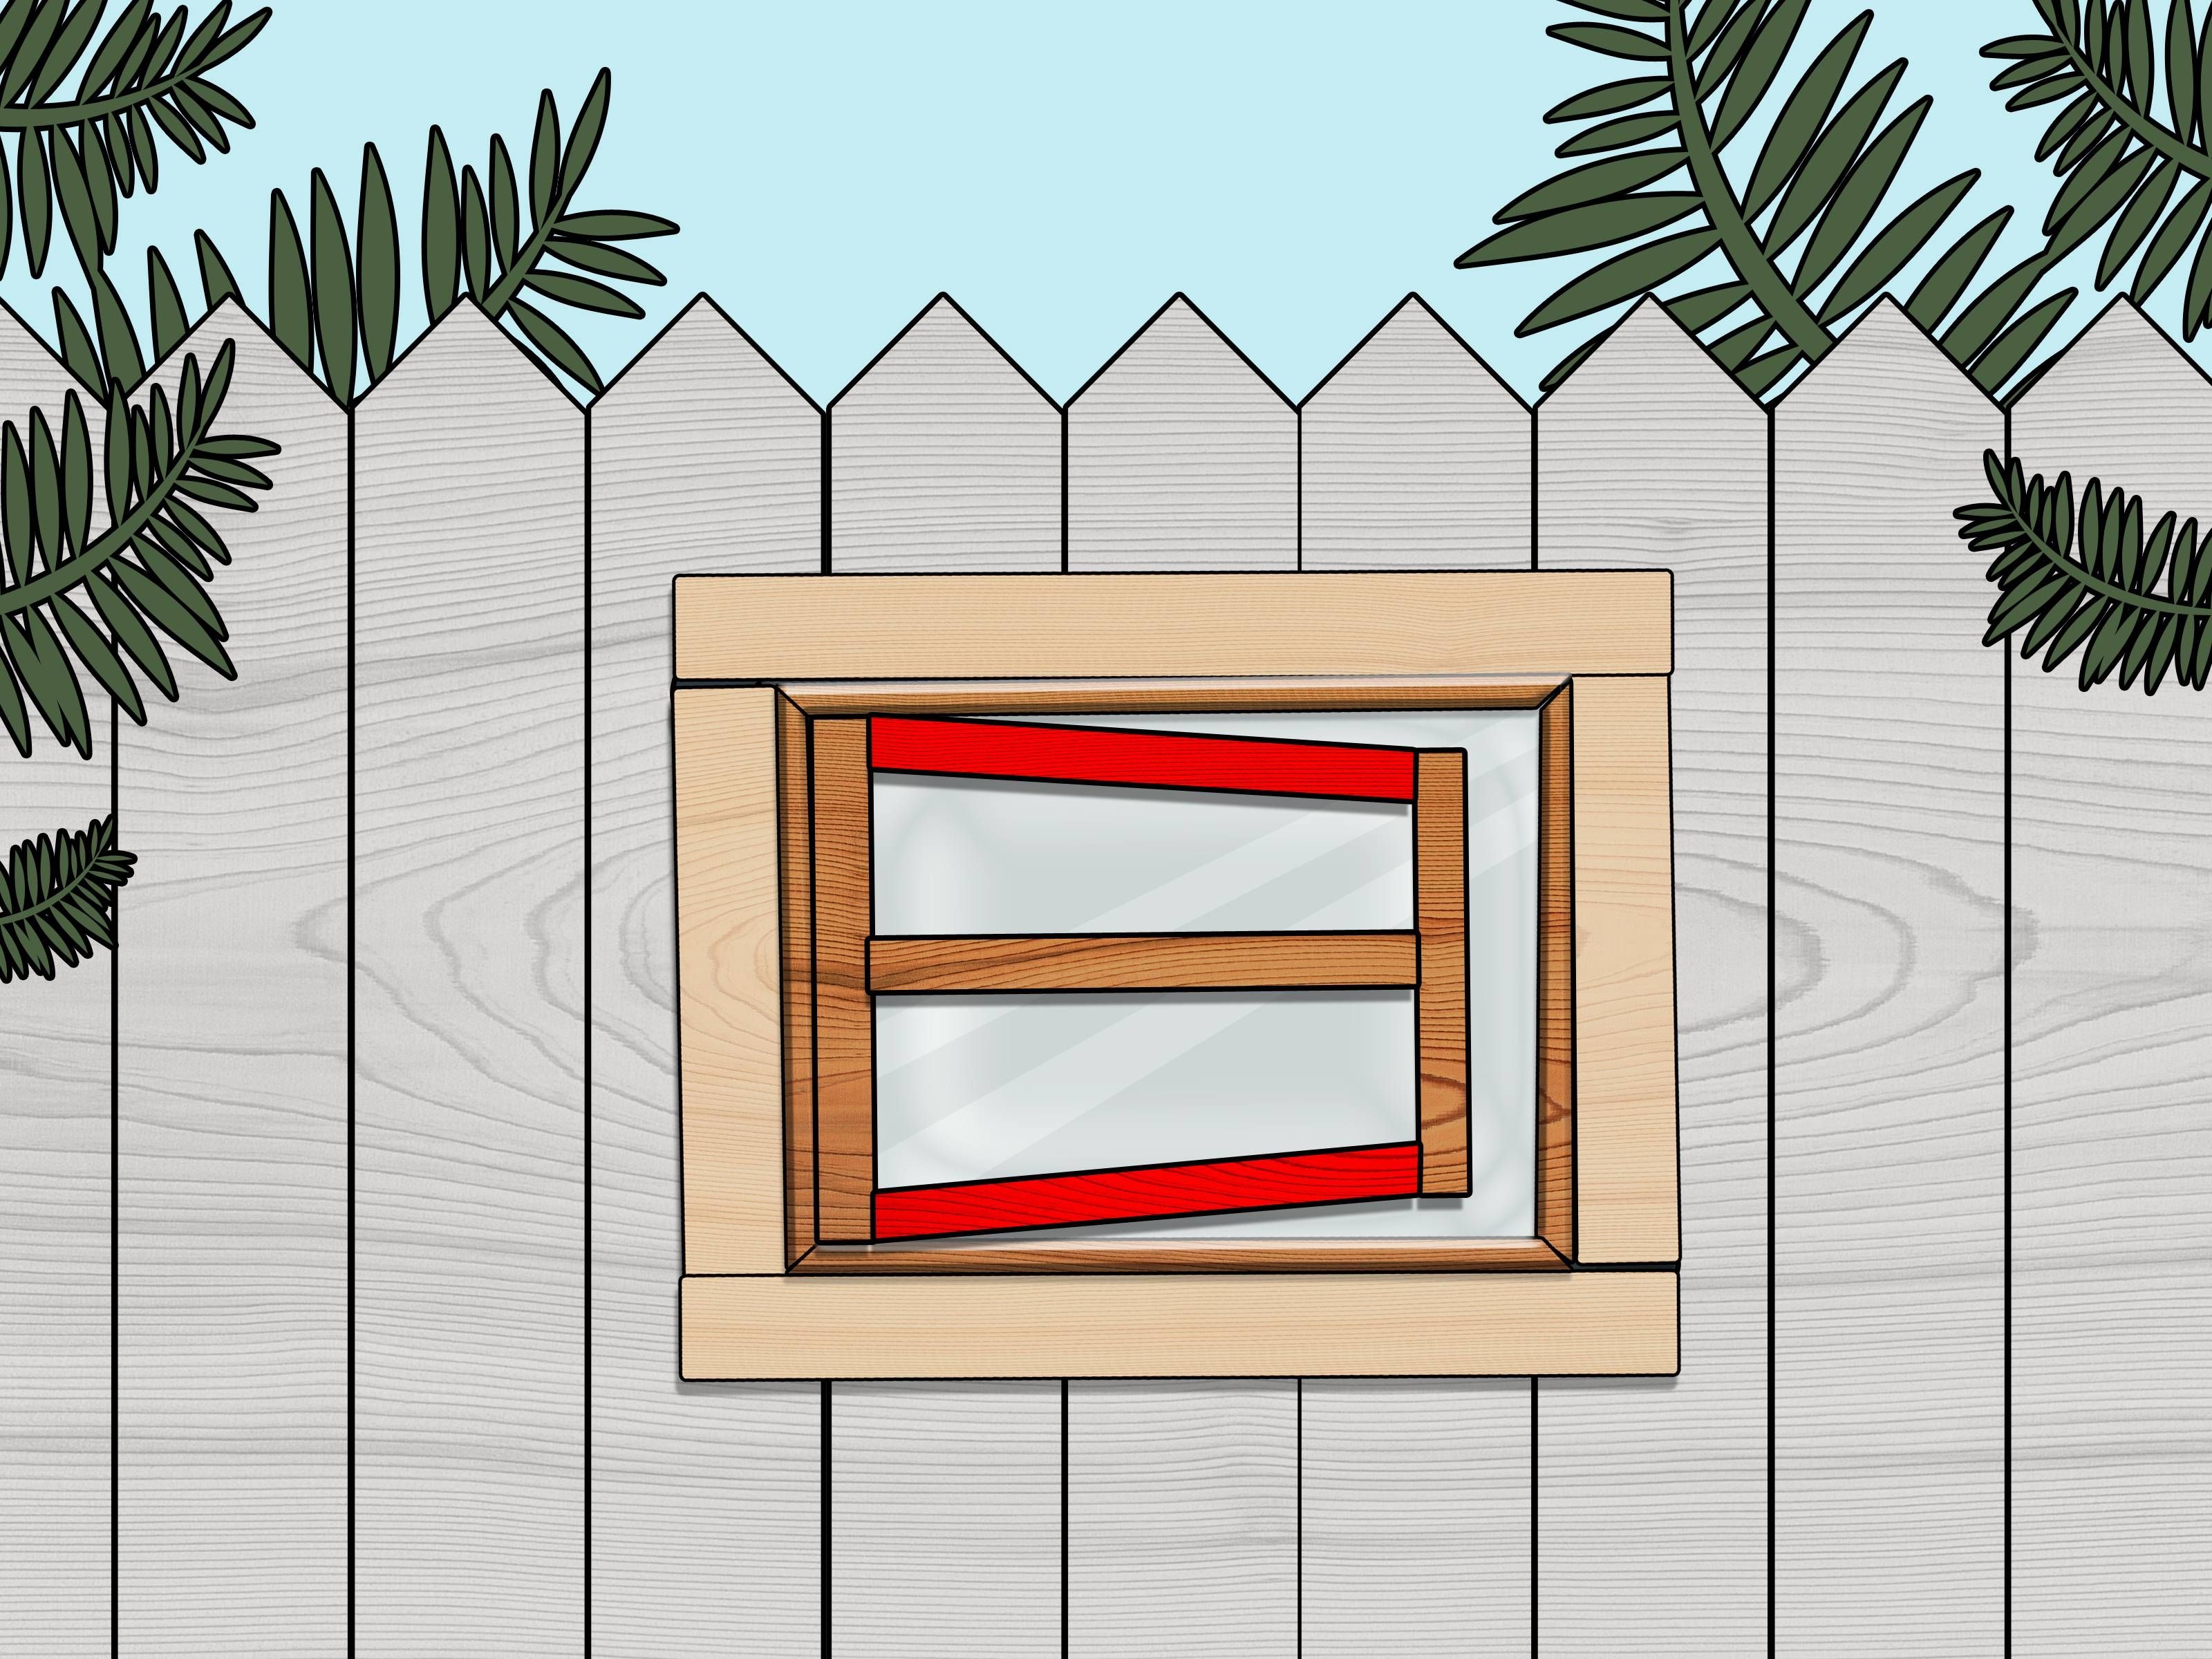 How To Make A Garden Mirror: 12 Steps (with Pictures) – Wikihow Throughout Garden Window Mirrors (View 21 of 25)